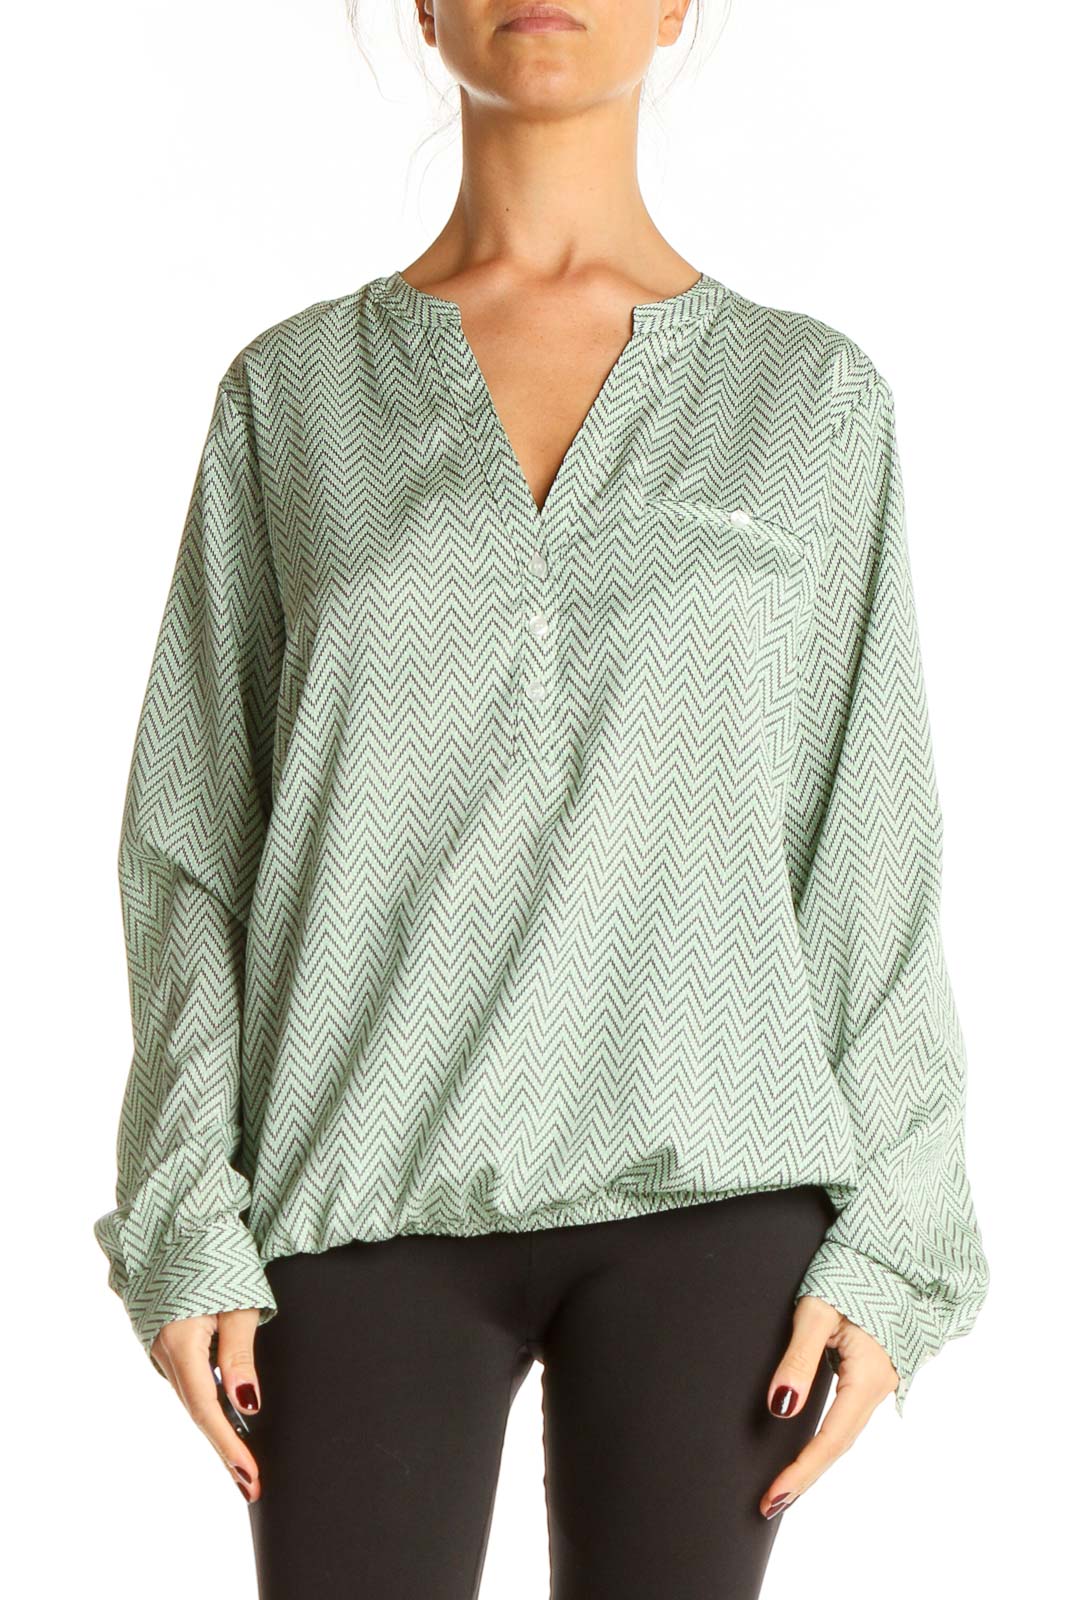 Green Chevron Chic Blouse Front